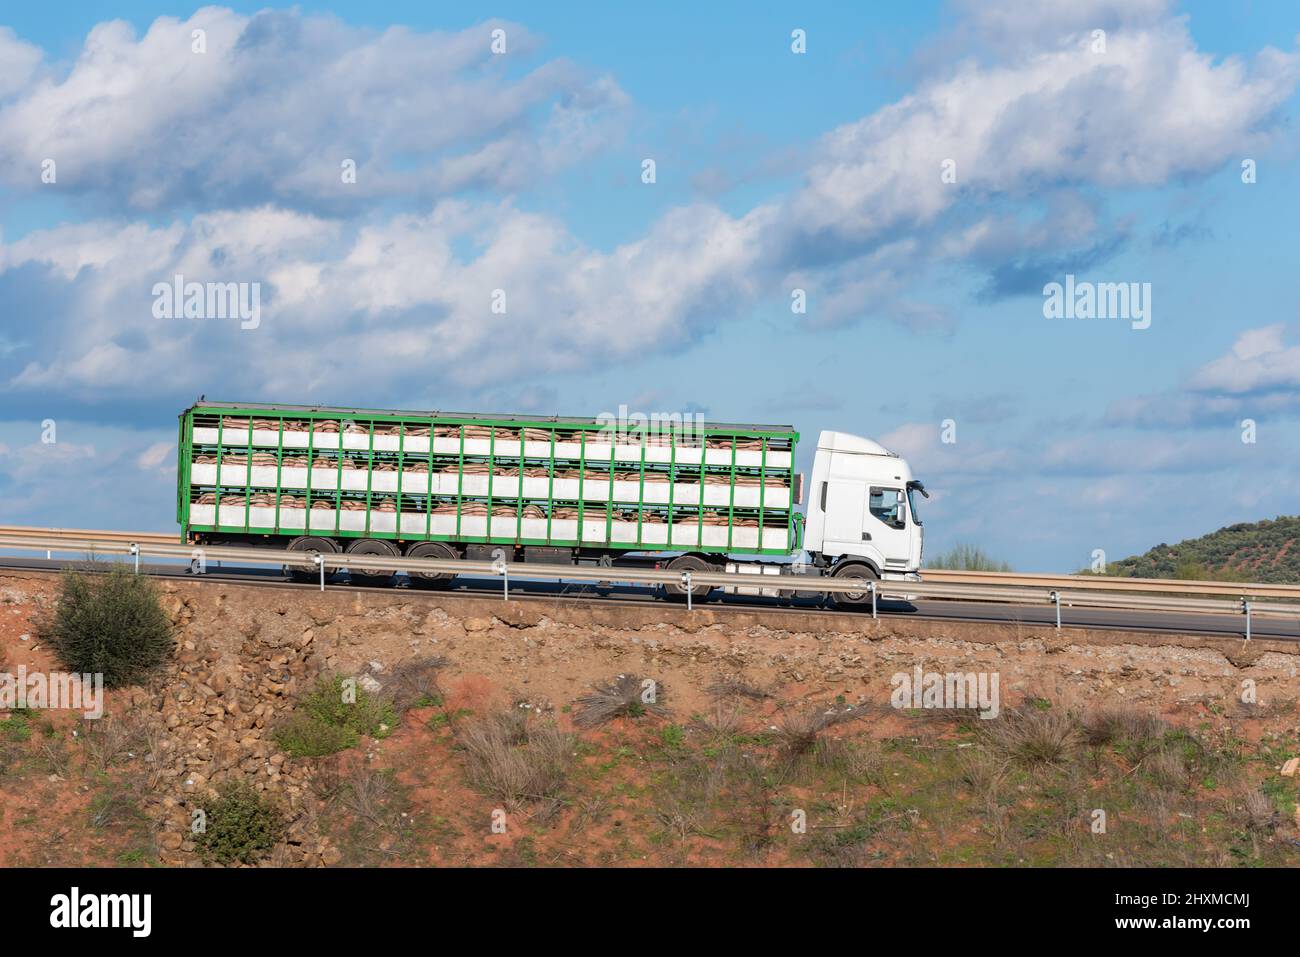 Cage truck for transporting livestock loaded with pigs circulating on a road, side view. Stock Photo